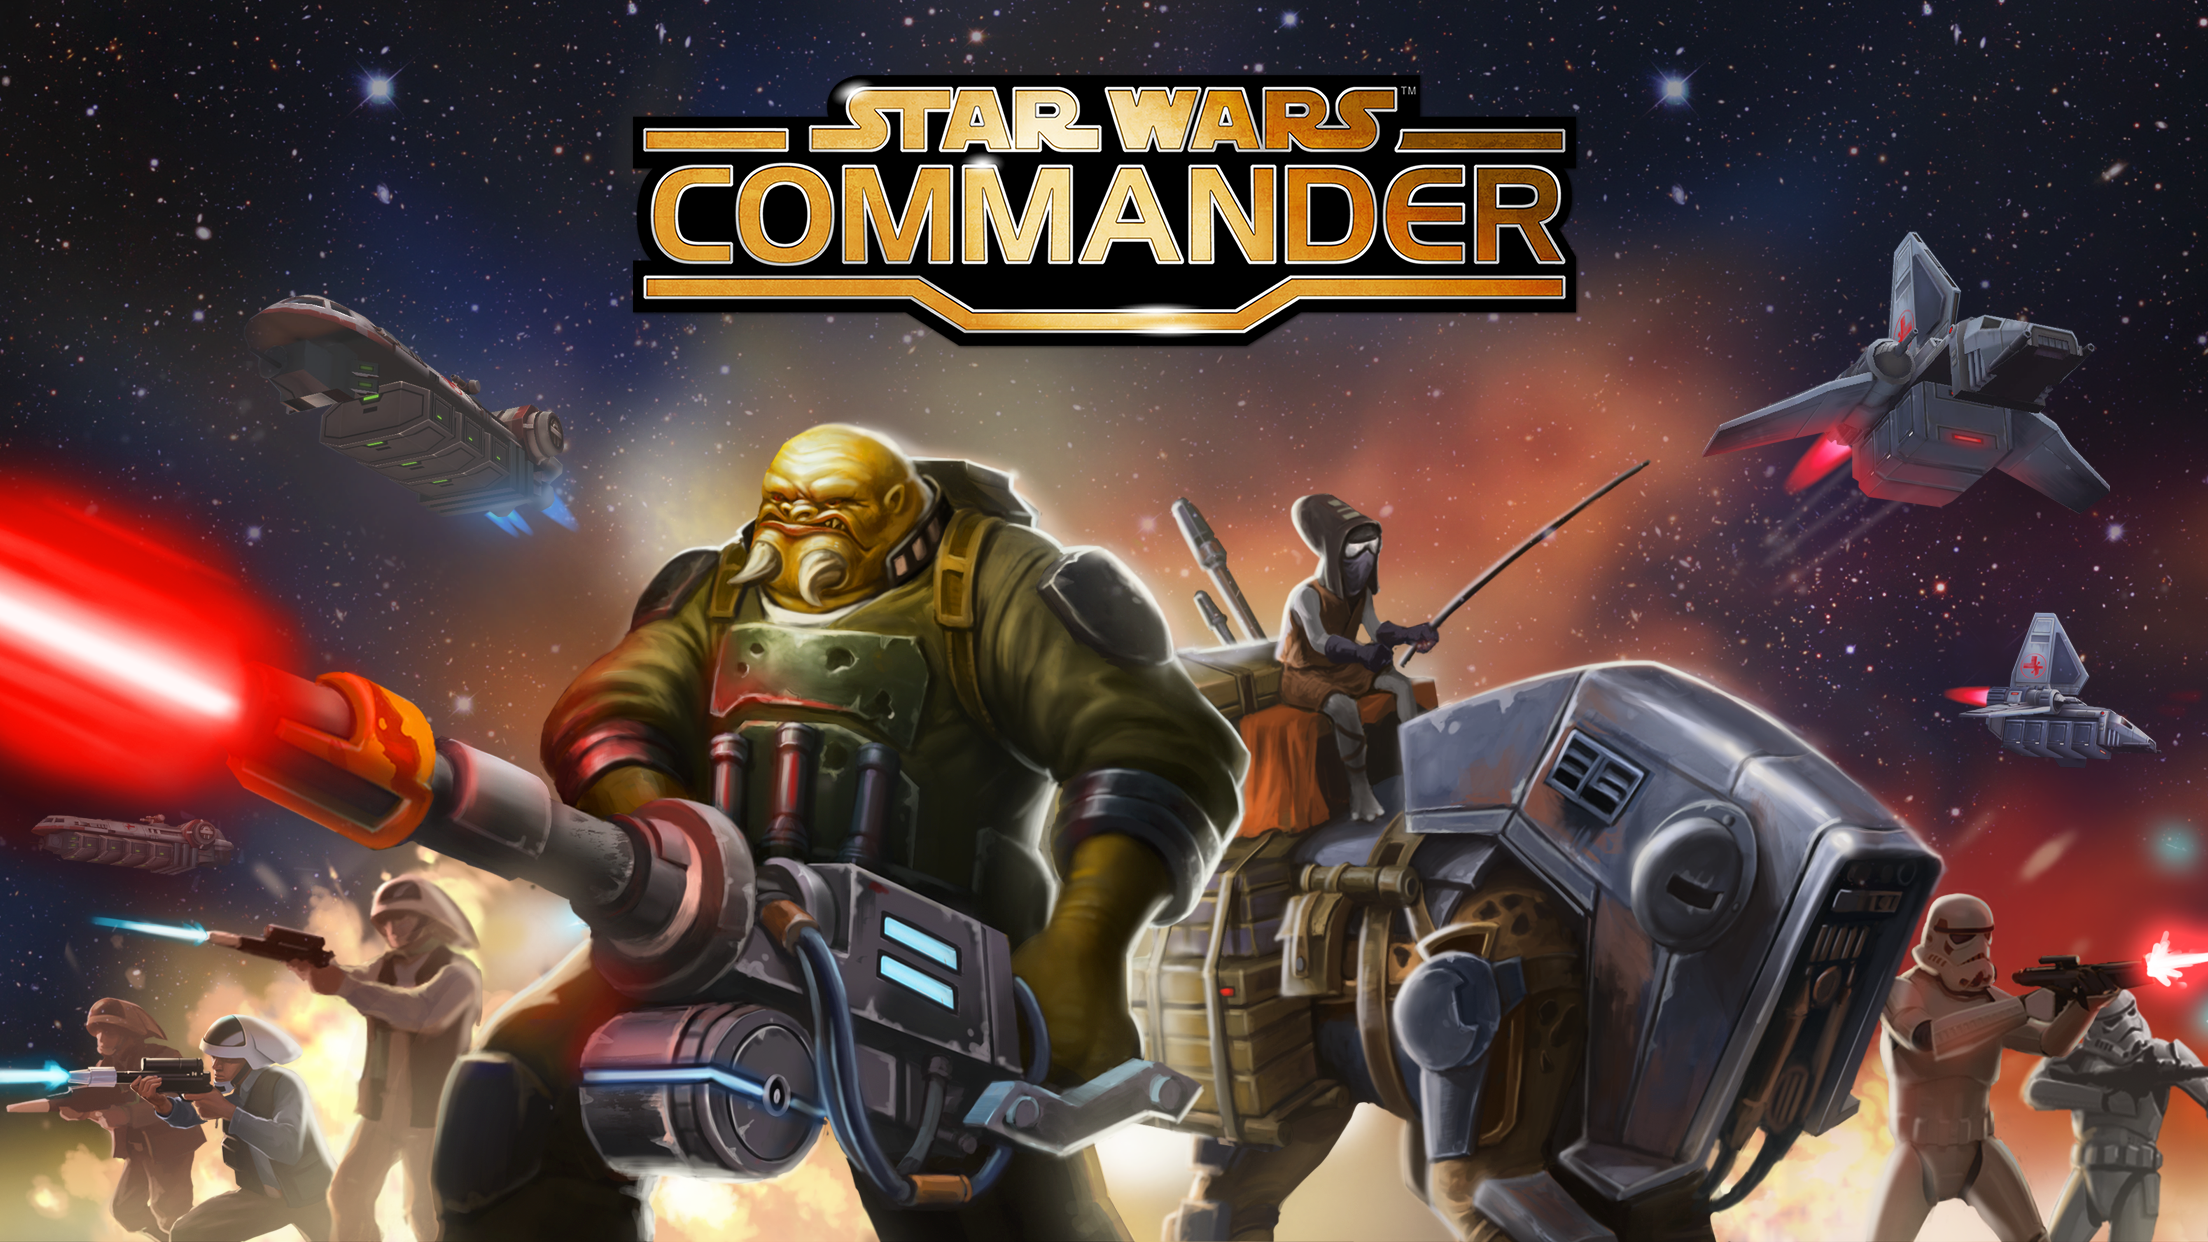 Star Wars™: Commander Brings In New Content Based On Star Wars™: The Force Awakens™